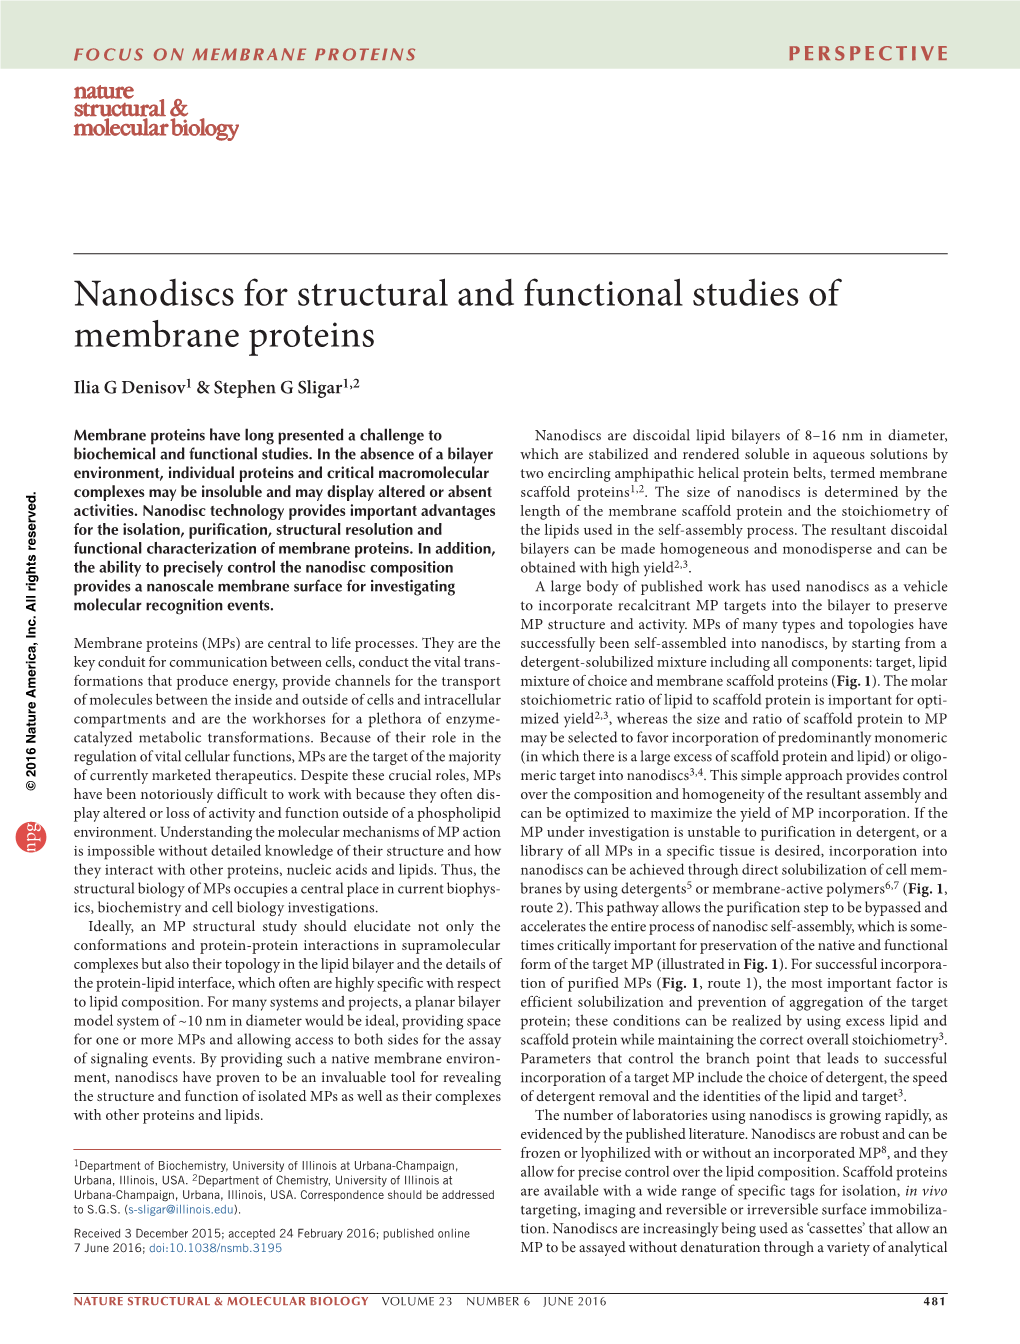 Nanodiscs for Structural and Functional Studies of Membrane Proteins